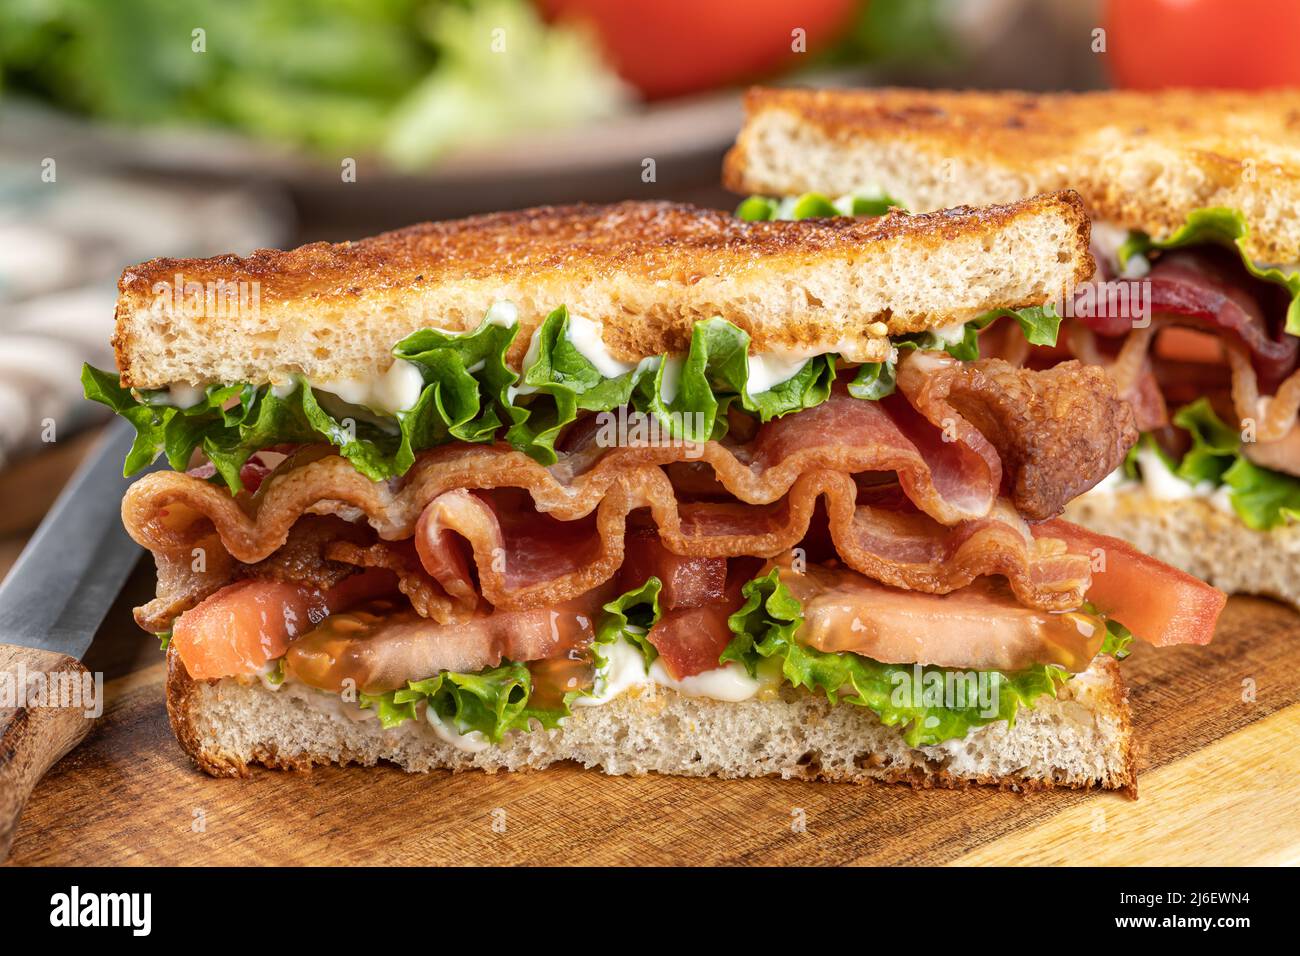 Closeup of blt sandwich made with bacon, lettuce and tomato on toasted whole grain bread cut in half on a wooden cutting board Stock Photo